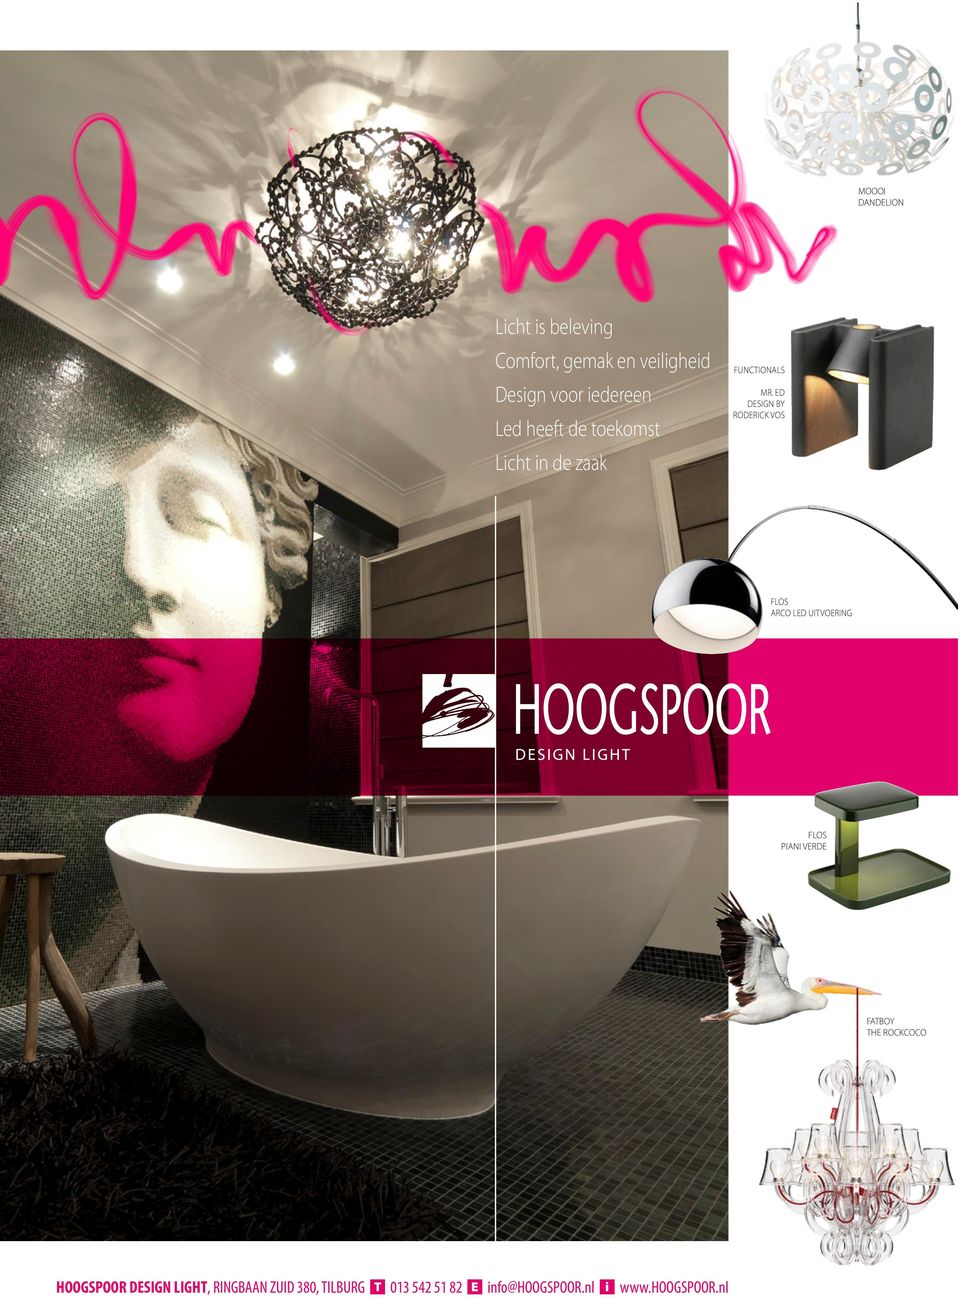 ED DESIGN BY RODERICK VOS ARCO LED UITVOERING PIANI VERDE FATBOY THE ROCKCOCO